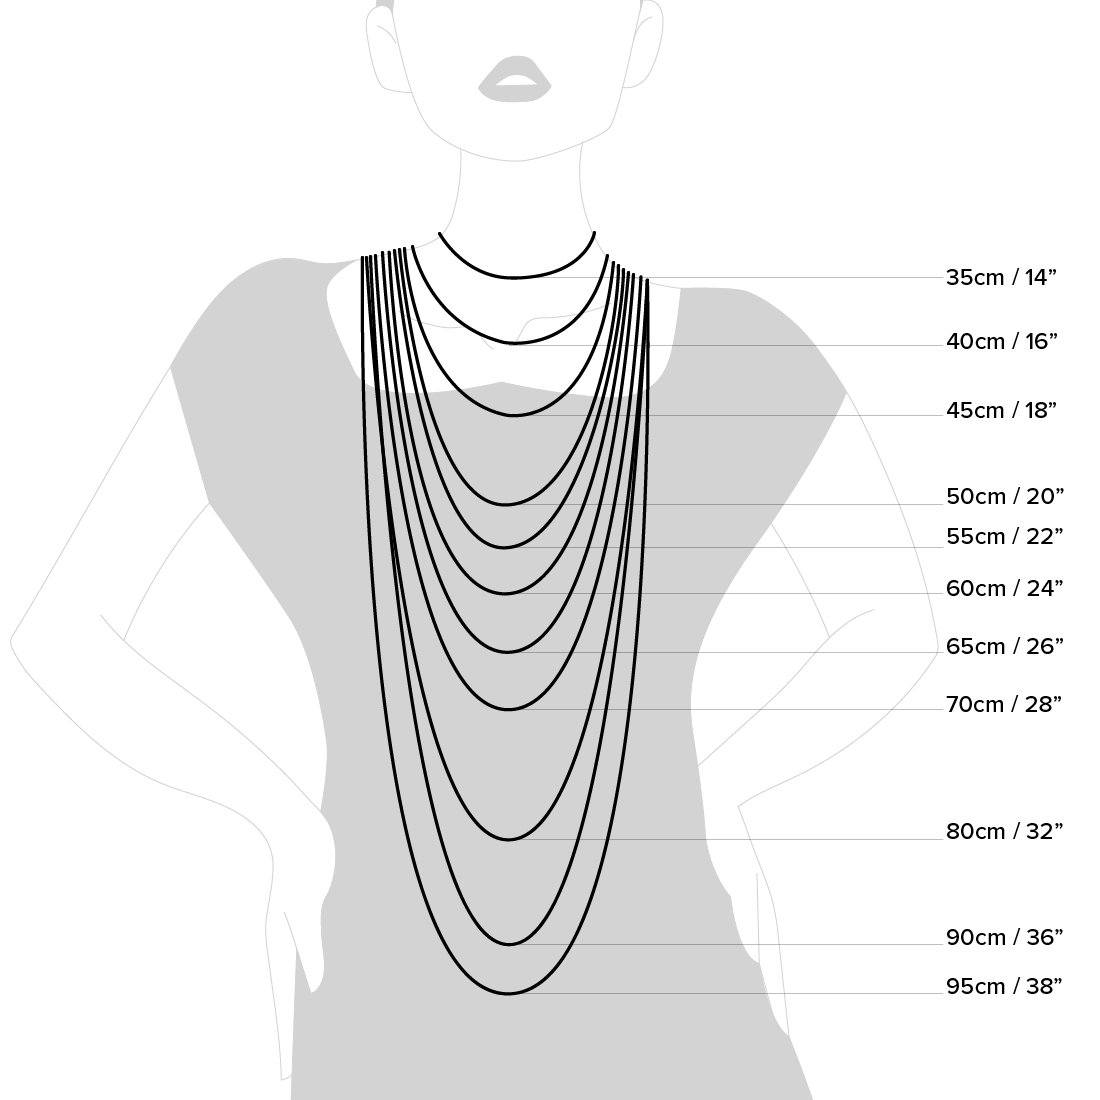 Sterling Silver Tight Curb Necklace 65cm Necklaces Bevilles 